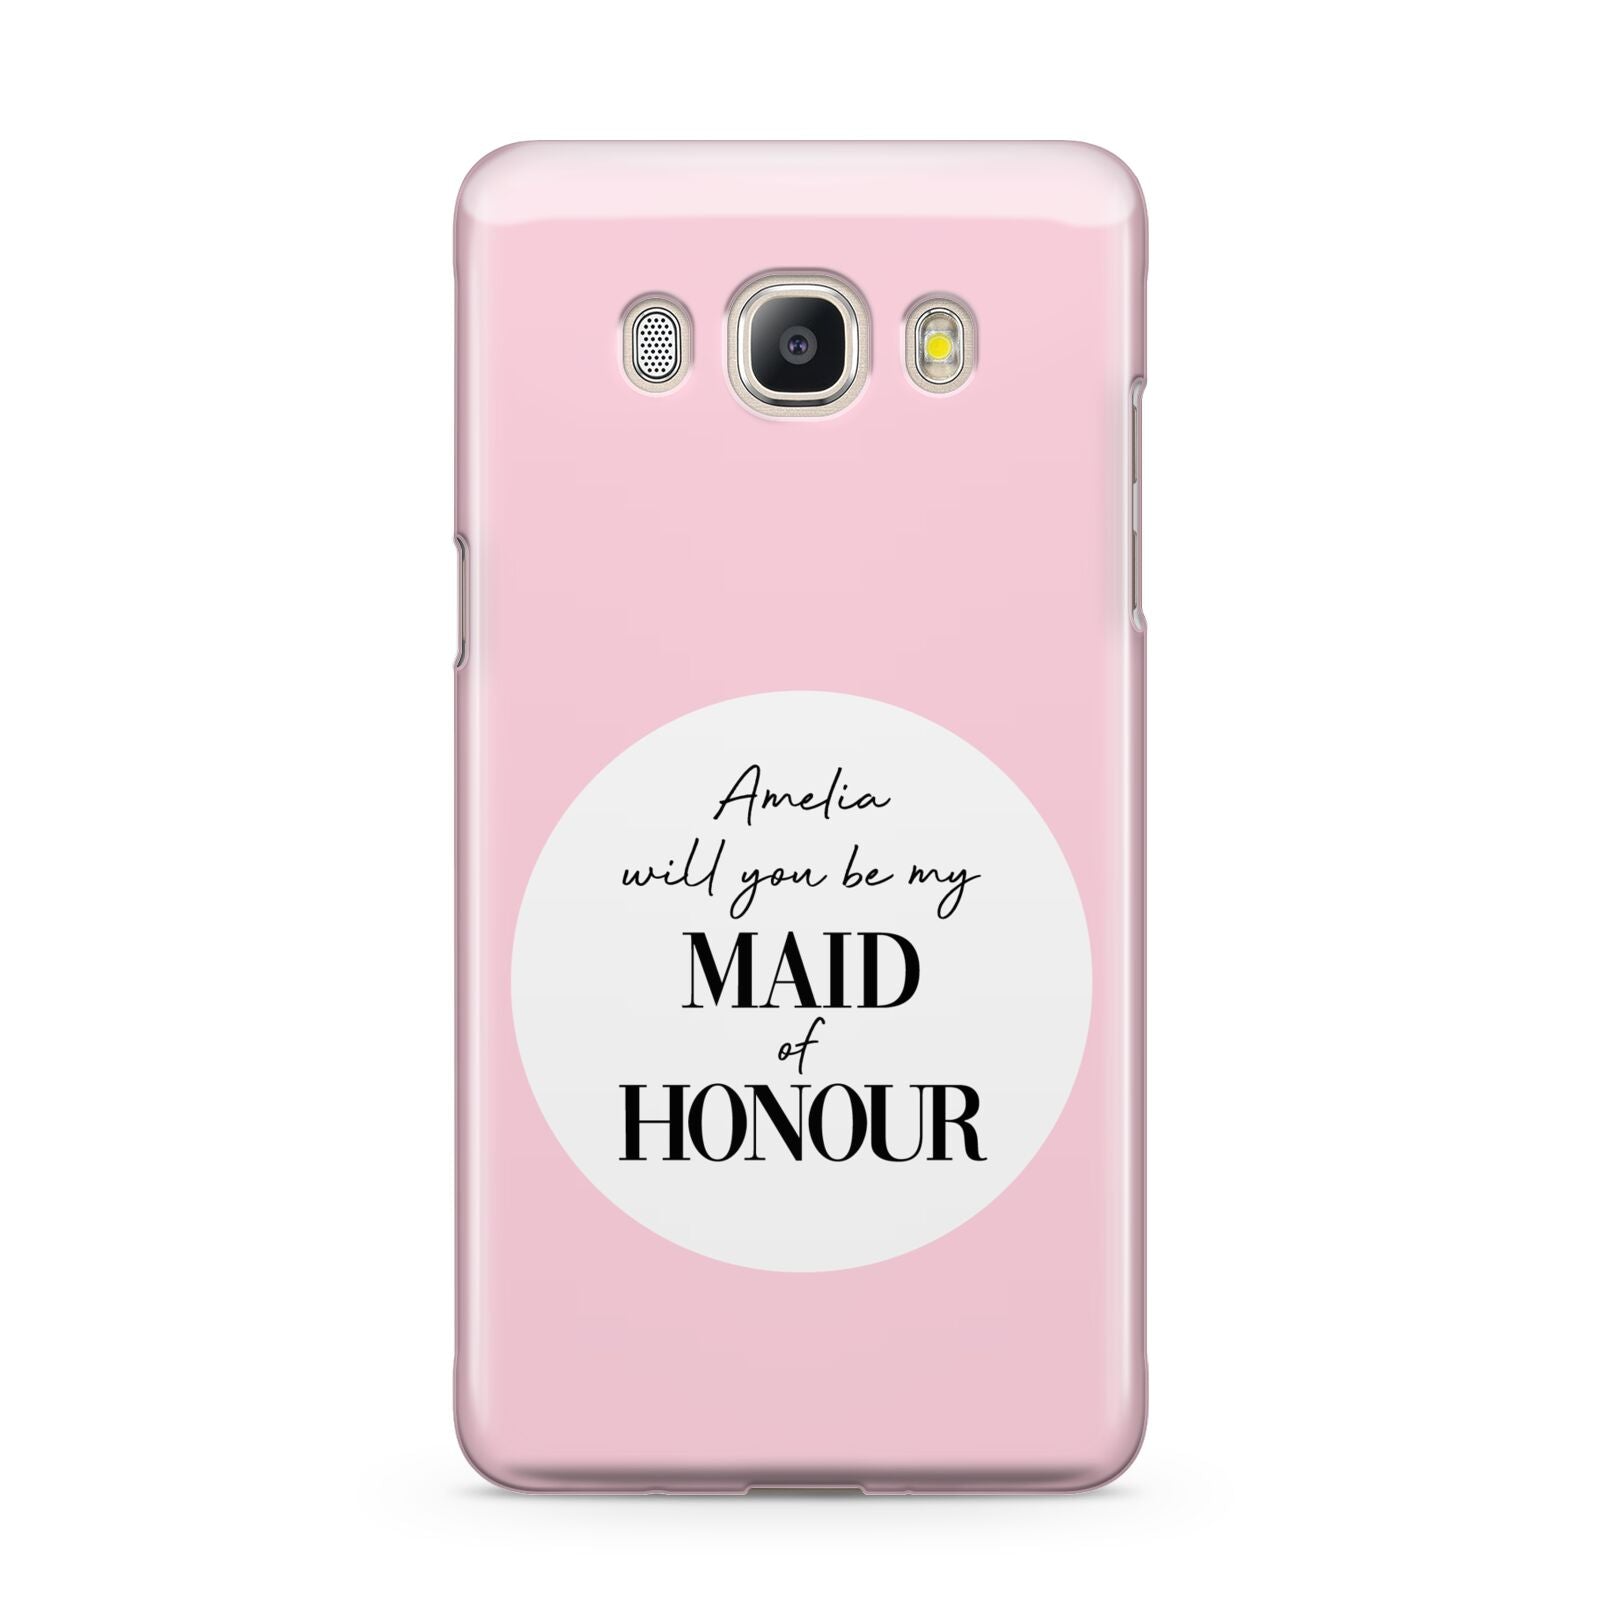 Will You Be My Maid Of Honour Samsung Galaxy J5 2016 Case